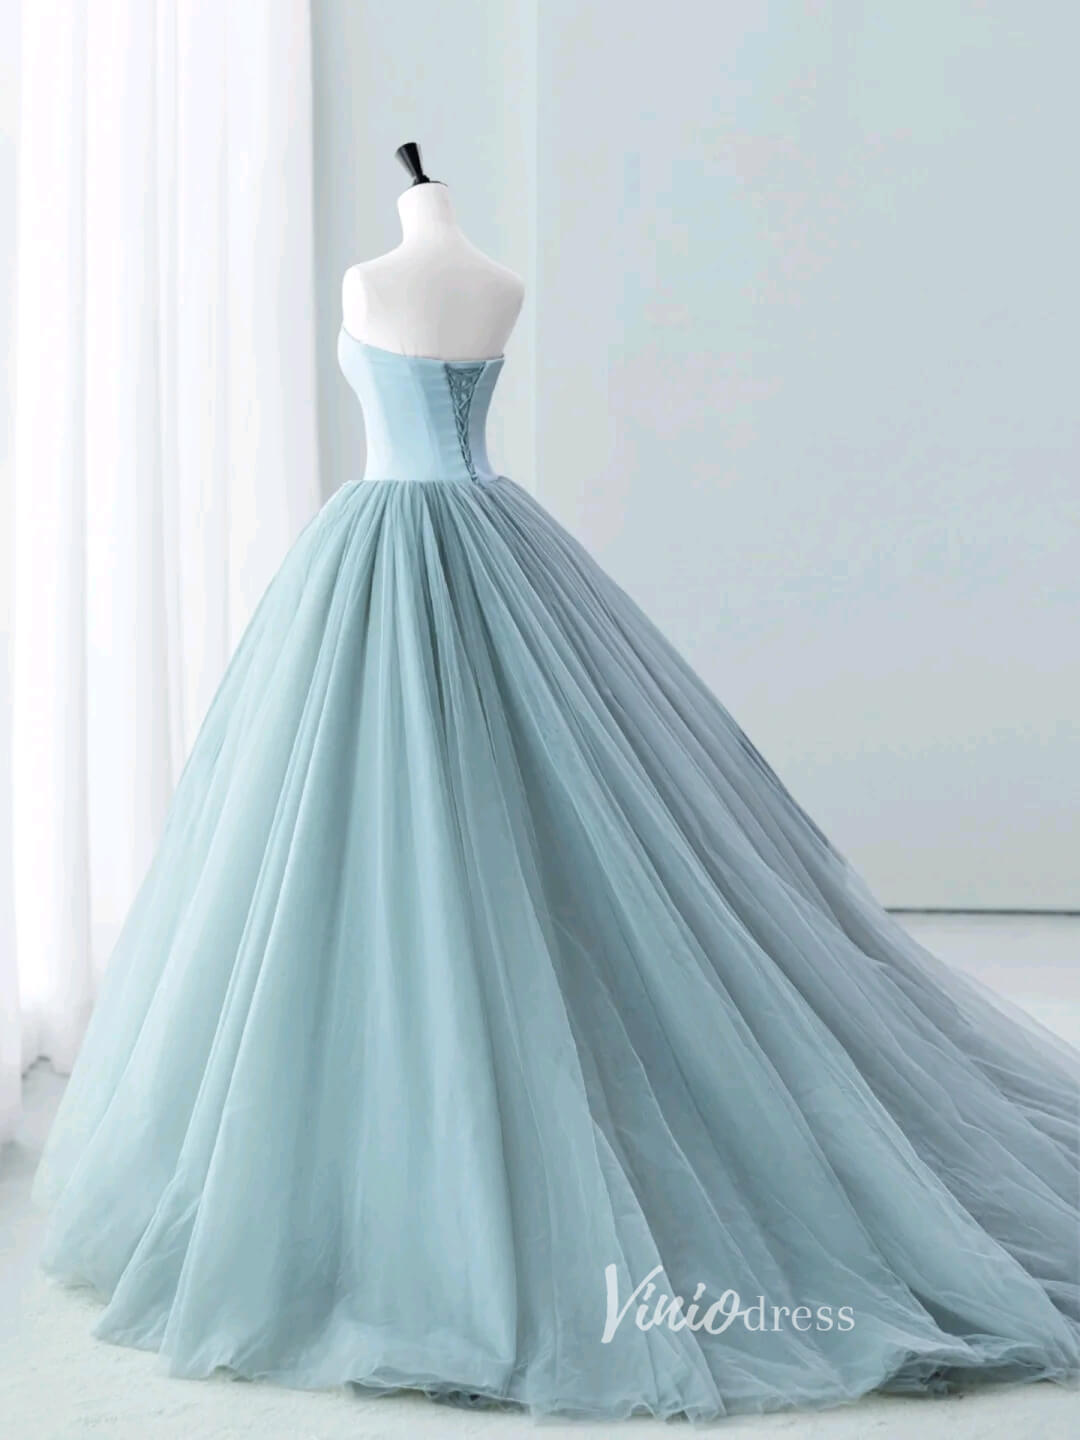 Dusty Blue Strapless Prom Dresses Pleated Tulle Formal Dress AD1036-prom dresses-Viniodress-Viniodress